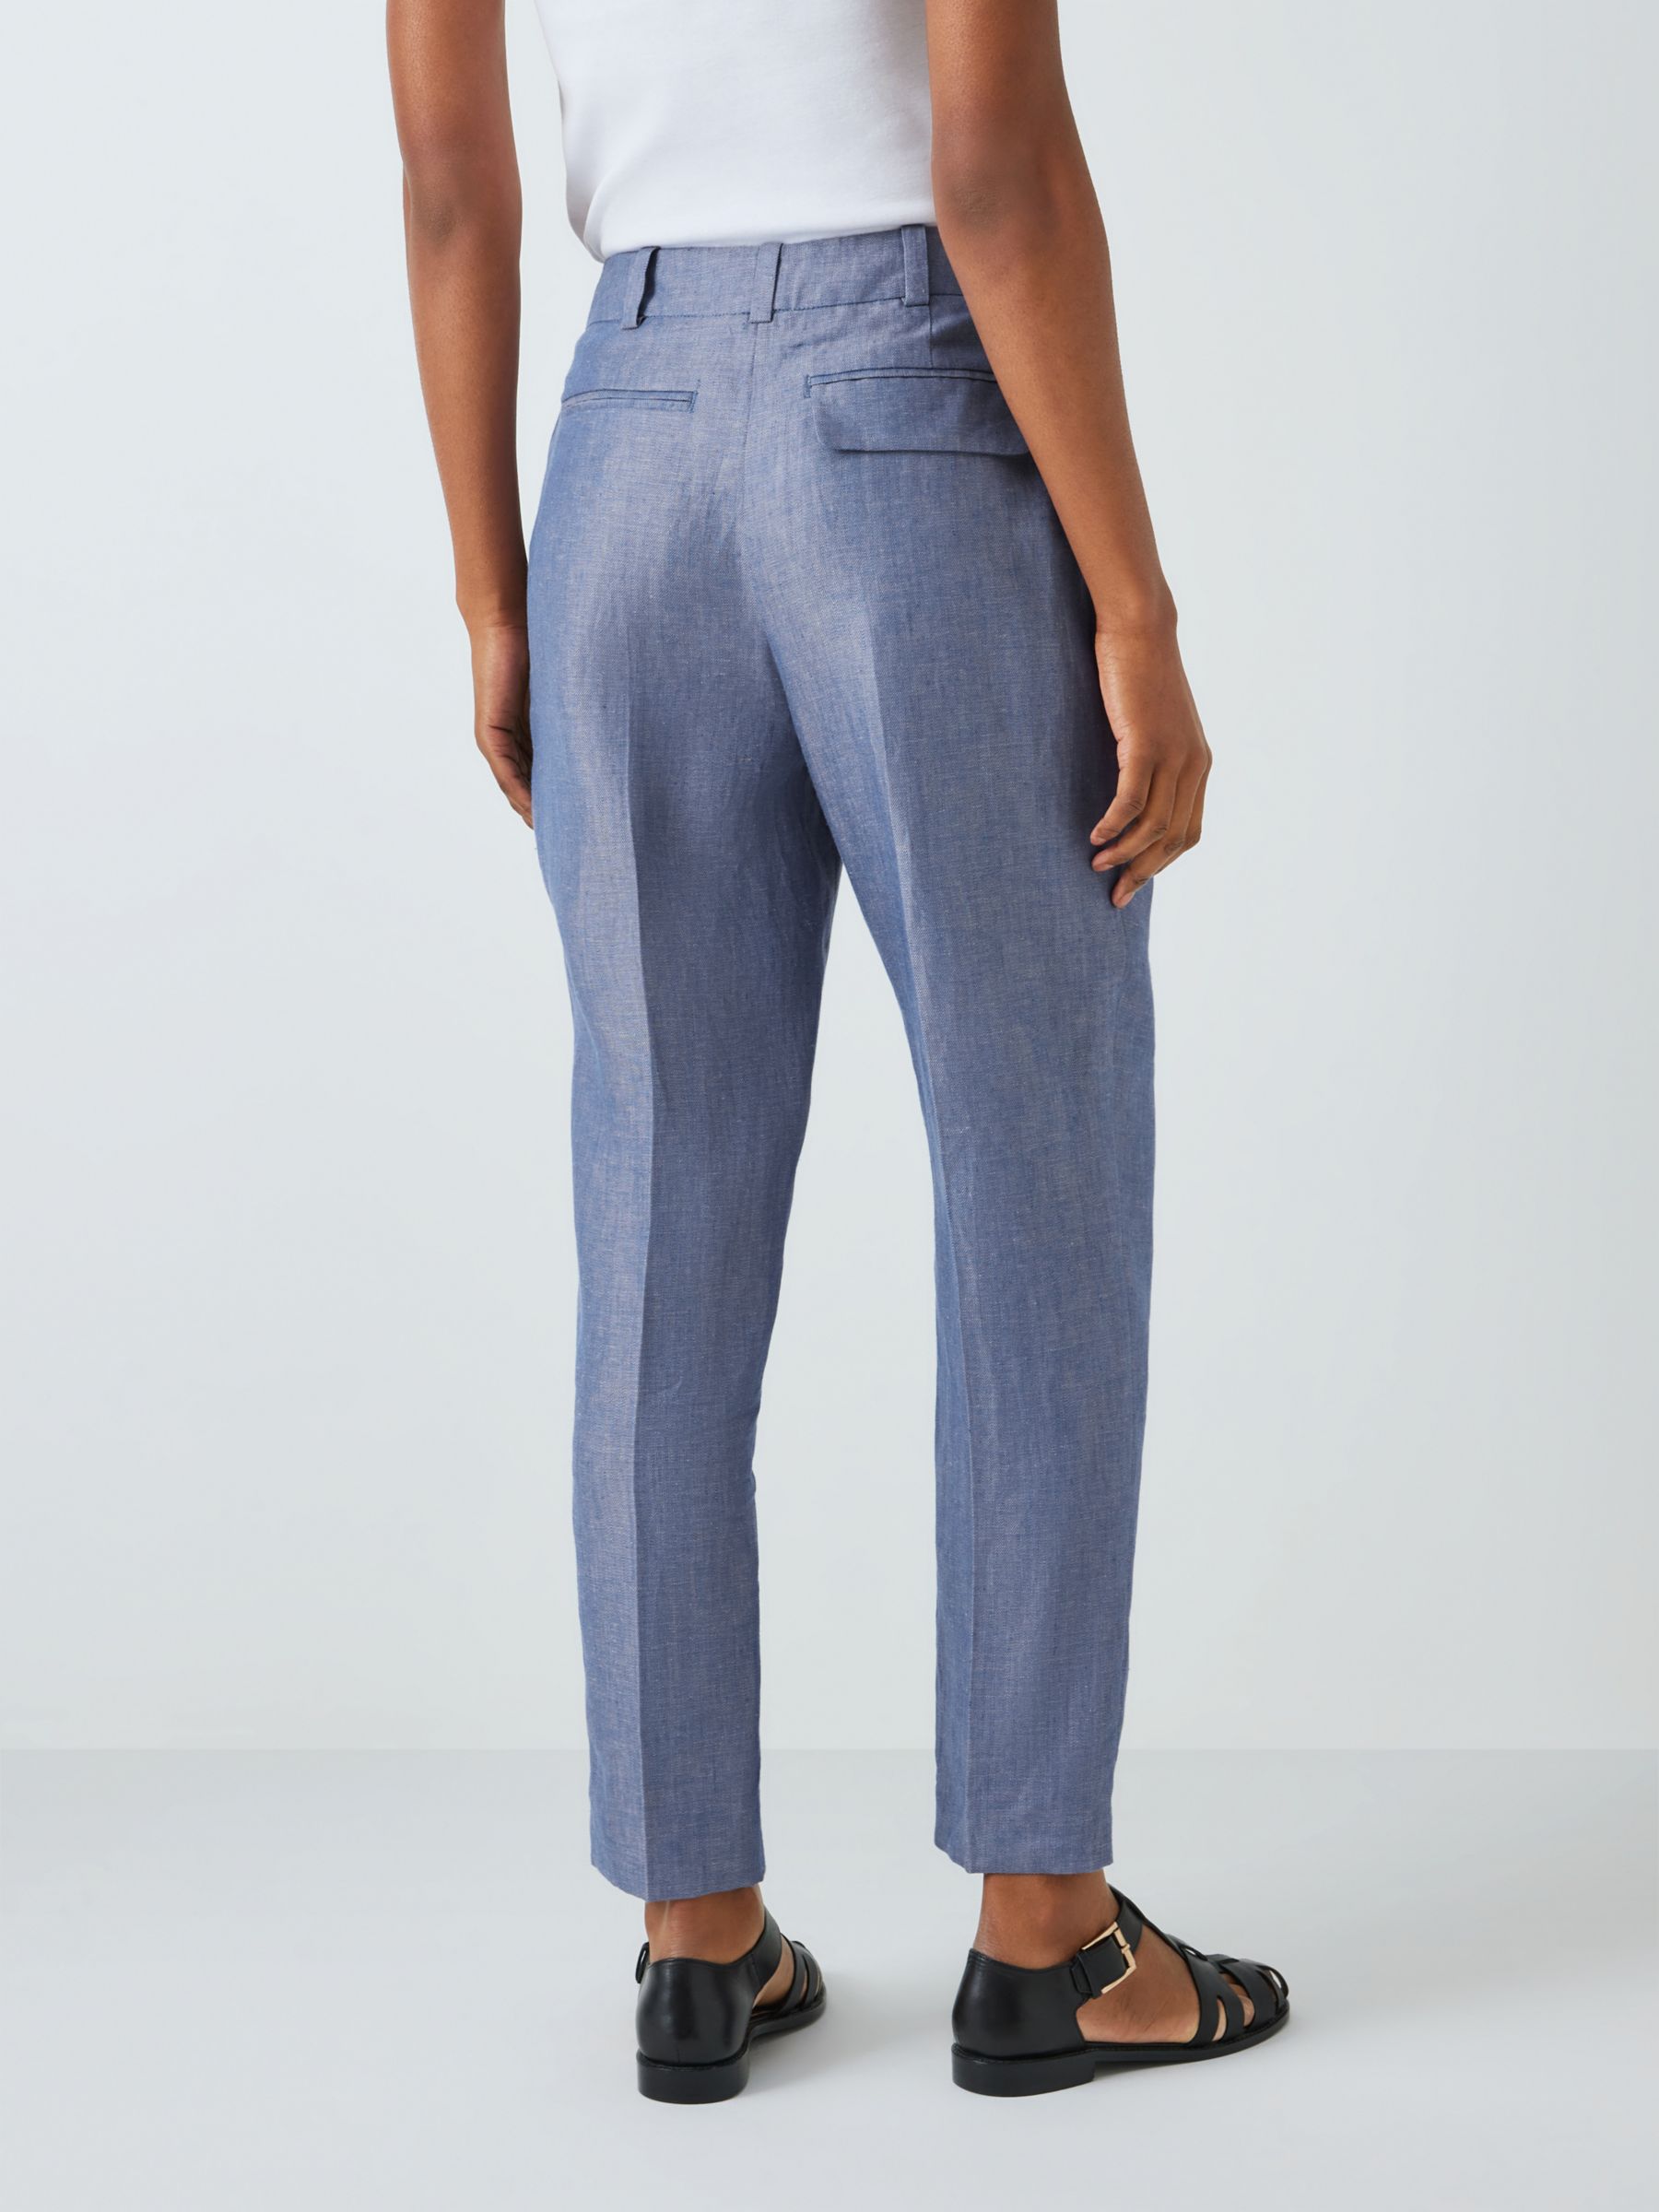 John Lewis Tapered Linen Trousers, Blue Twill, 10